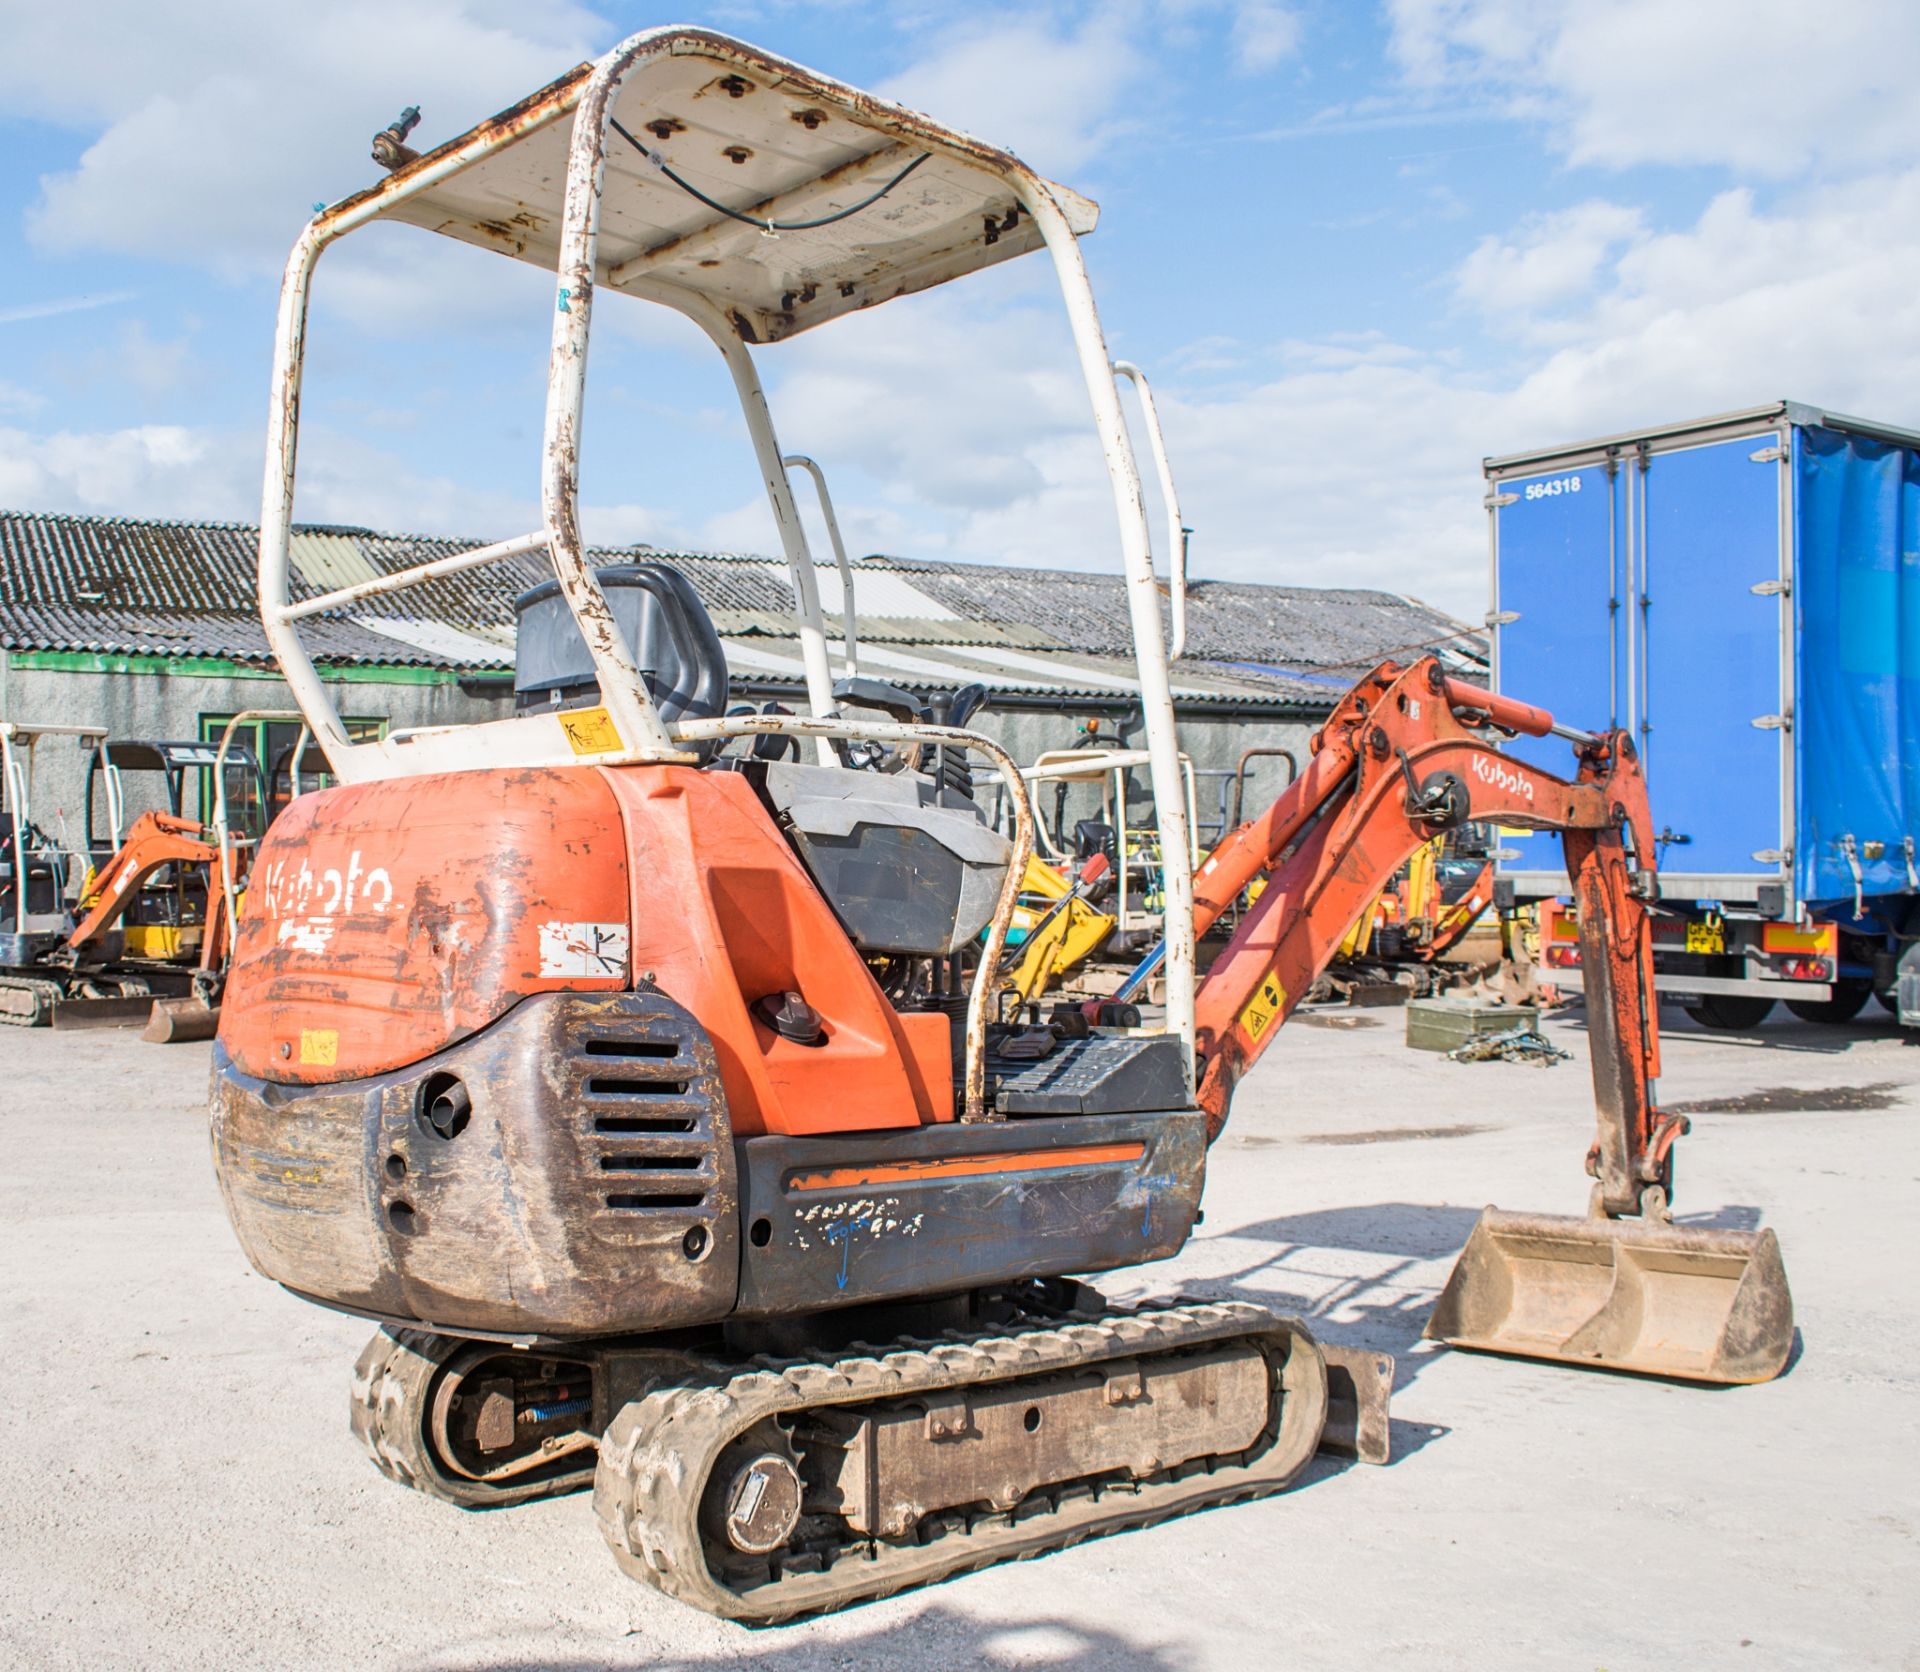 Kubota KX36-3 1.5 tonne rubber tracked excavator Year: 2008 S/N: 2078047 Recorded Hours: 5335 - Image 3 of 12